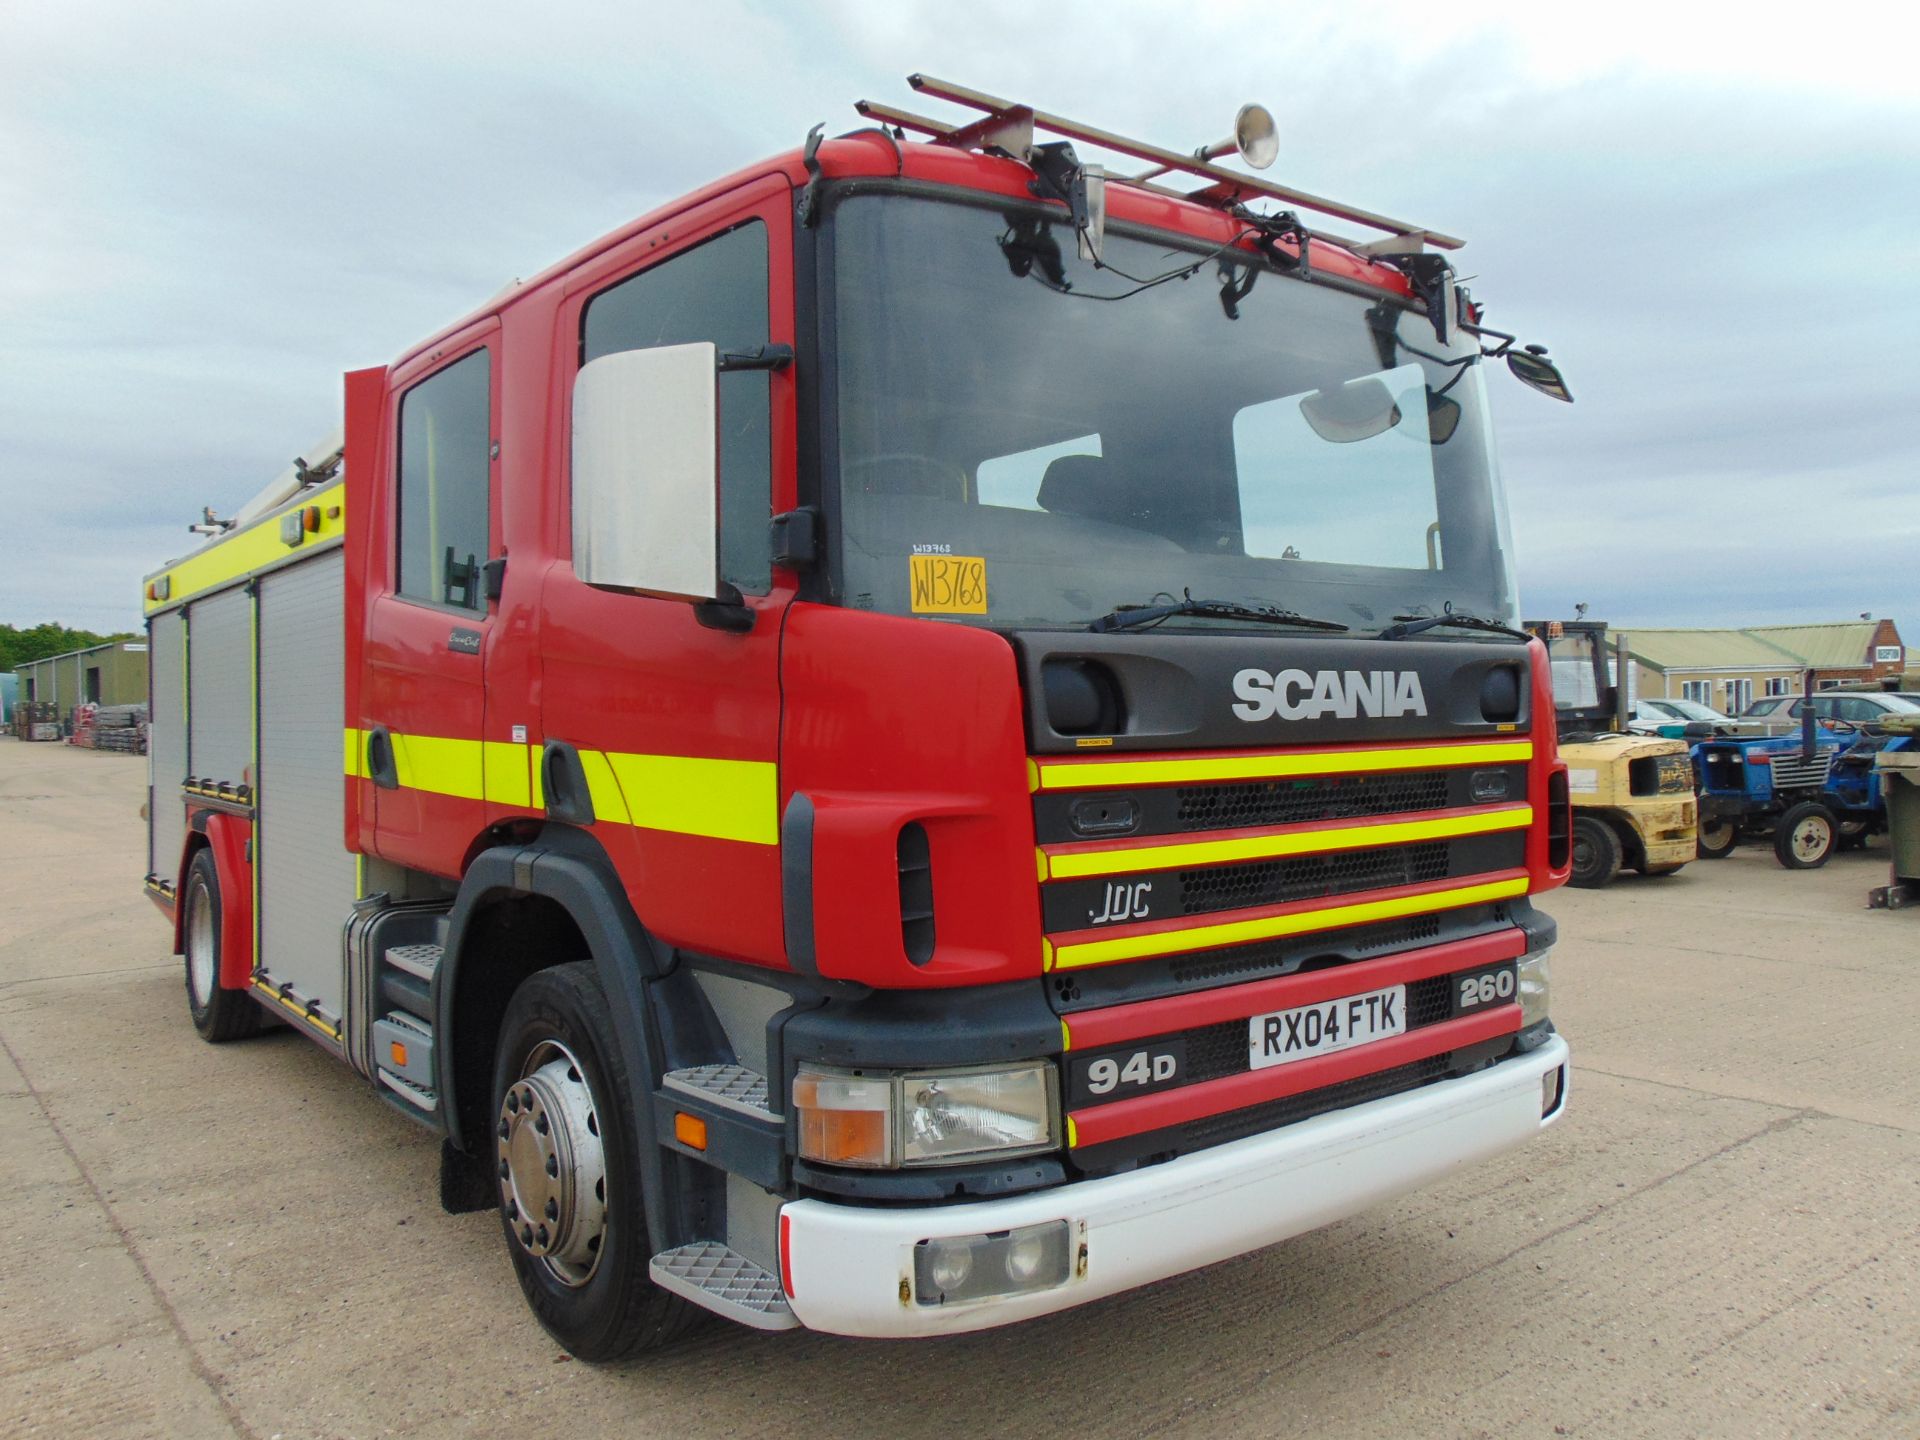 Scania 94D 260 4x2 Fire Engine ONLY 86,885km - Image 2 of 40